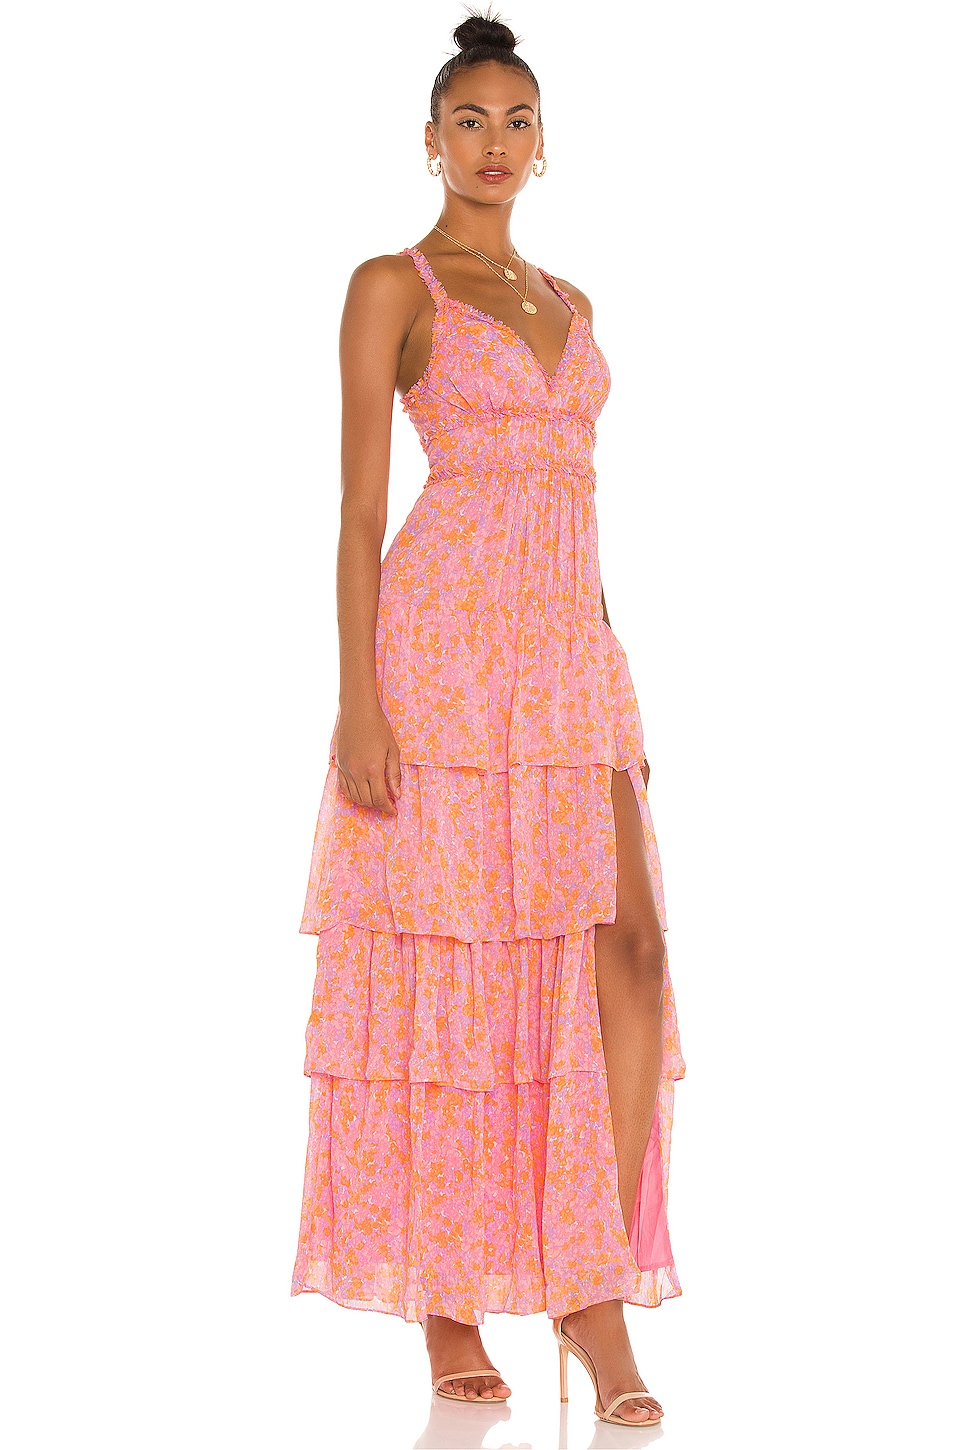 LIKELY Athena Maxi Dress in Pink Multi | REVOLVE